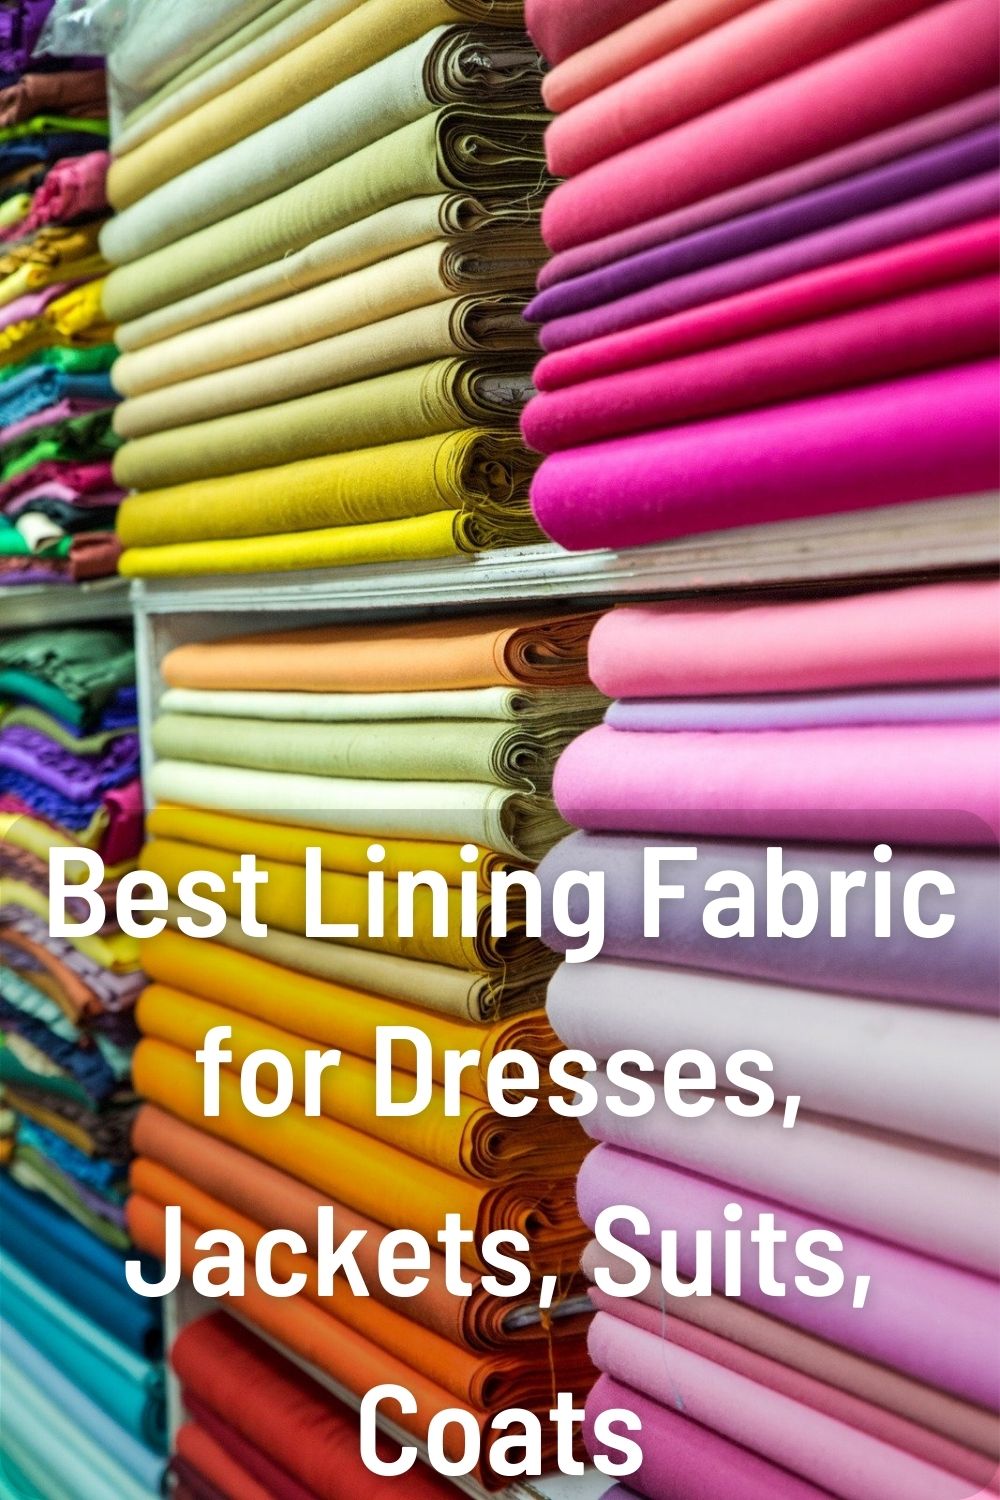 Best Lining Fabrics for Suits and Jackets